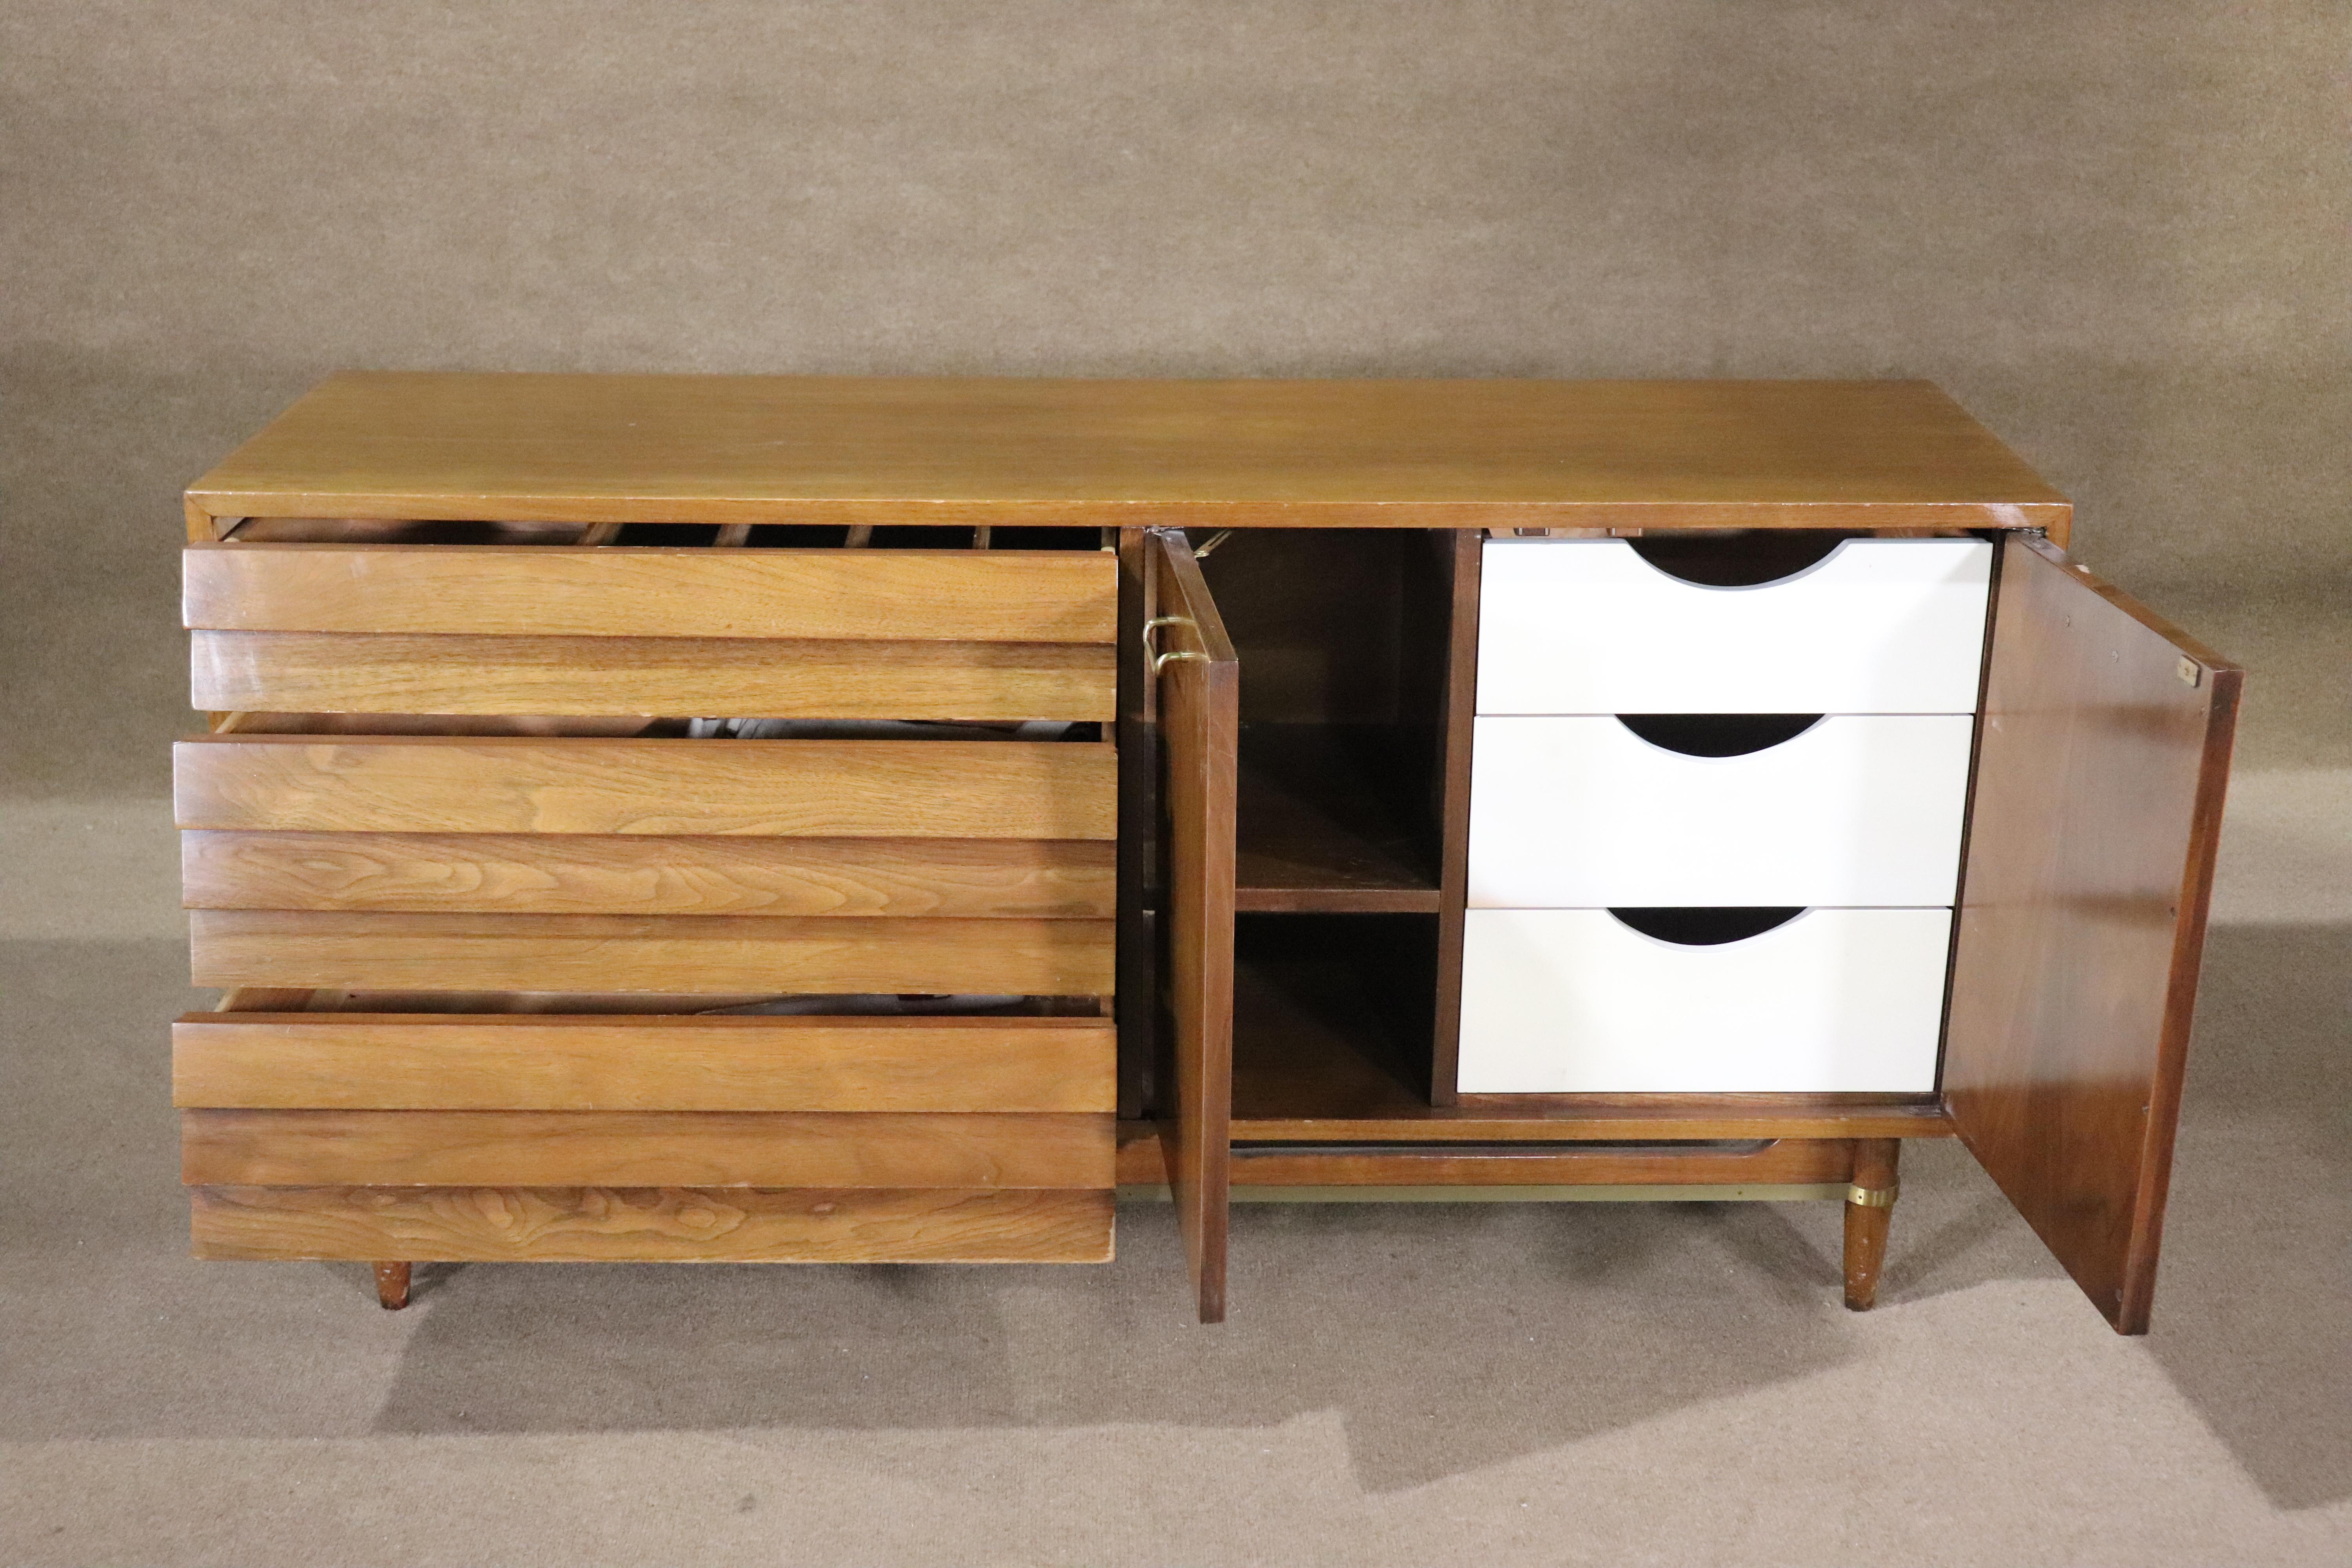 Classic mid-century modern dresser by American of Martinsville, designed by Merton Gershun for his 'Dania' series. Features his louvered front drawers and accenting brass hardware. Right side has cabinet storage and sock drawers.
Please confirm